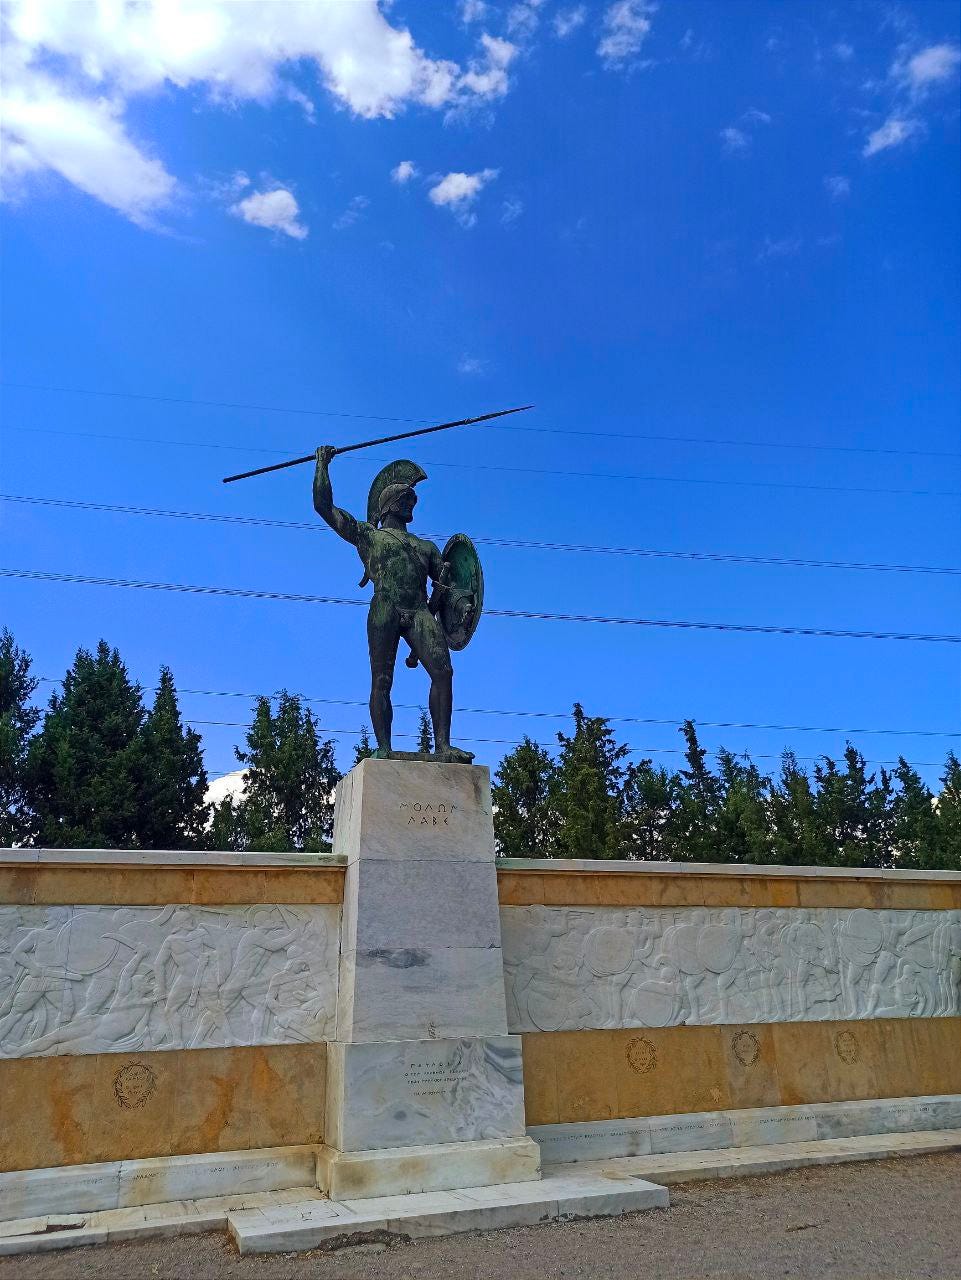 Photo by author. The memorial to the famous Battle of Thermopylae